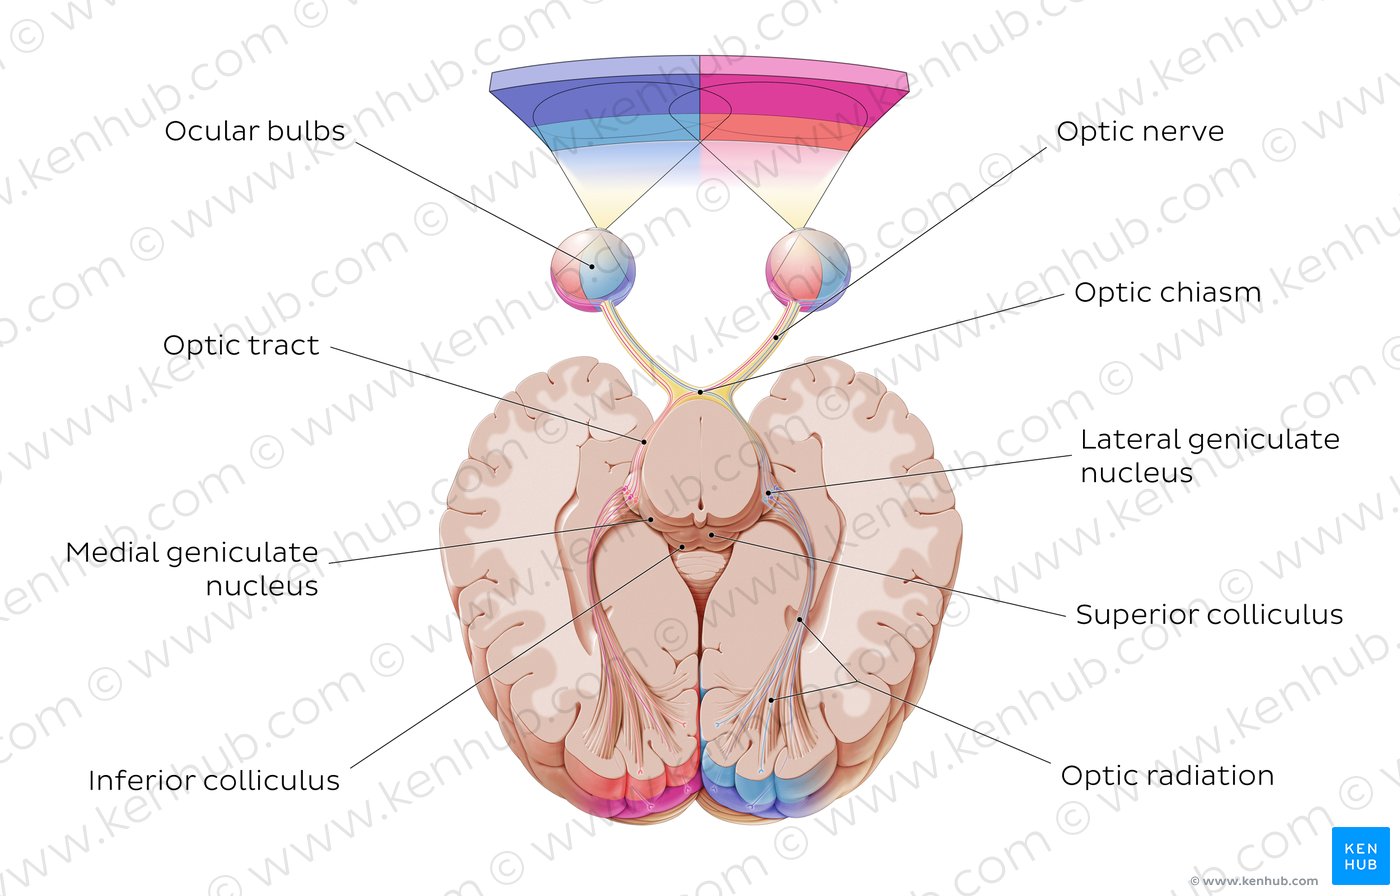 Overview of the optic nerve